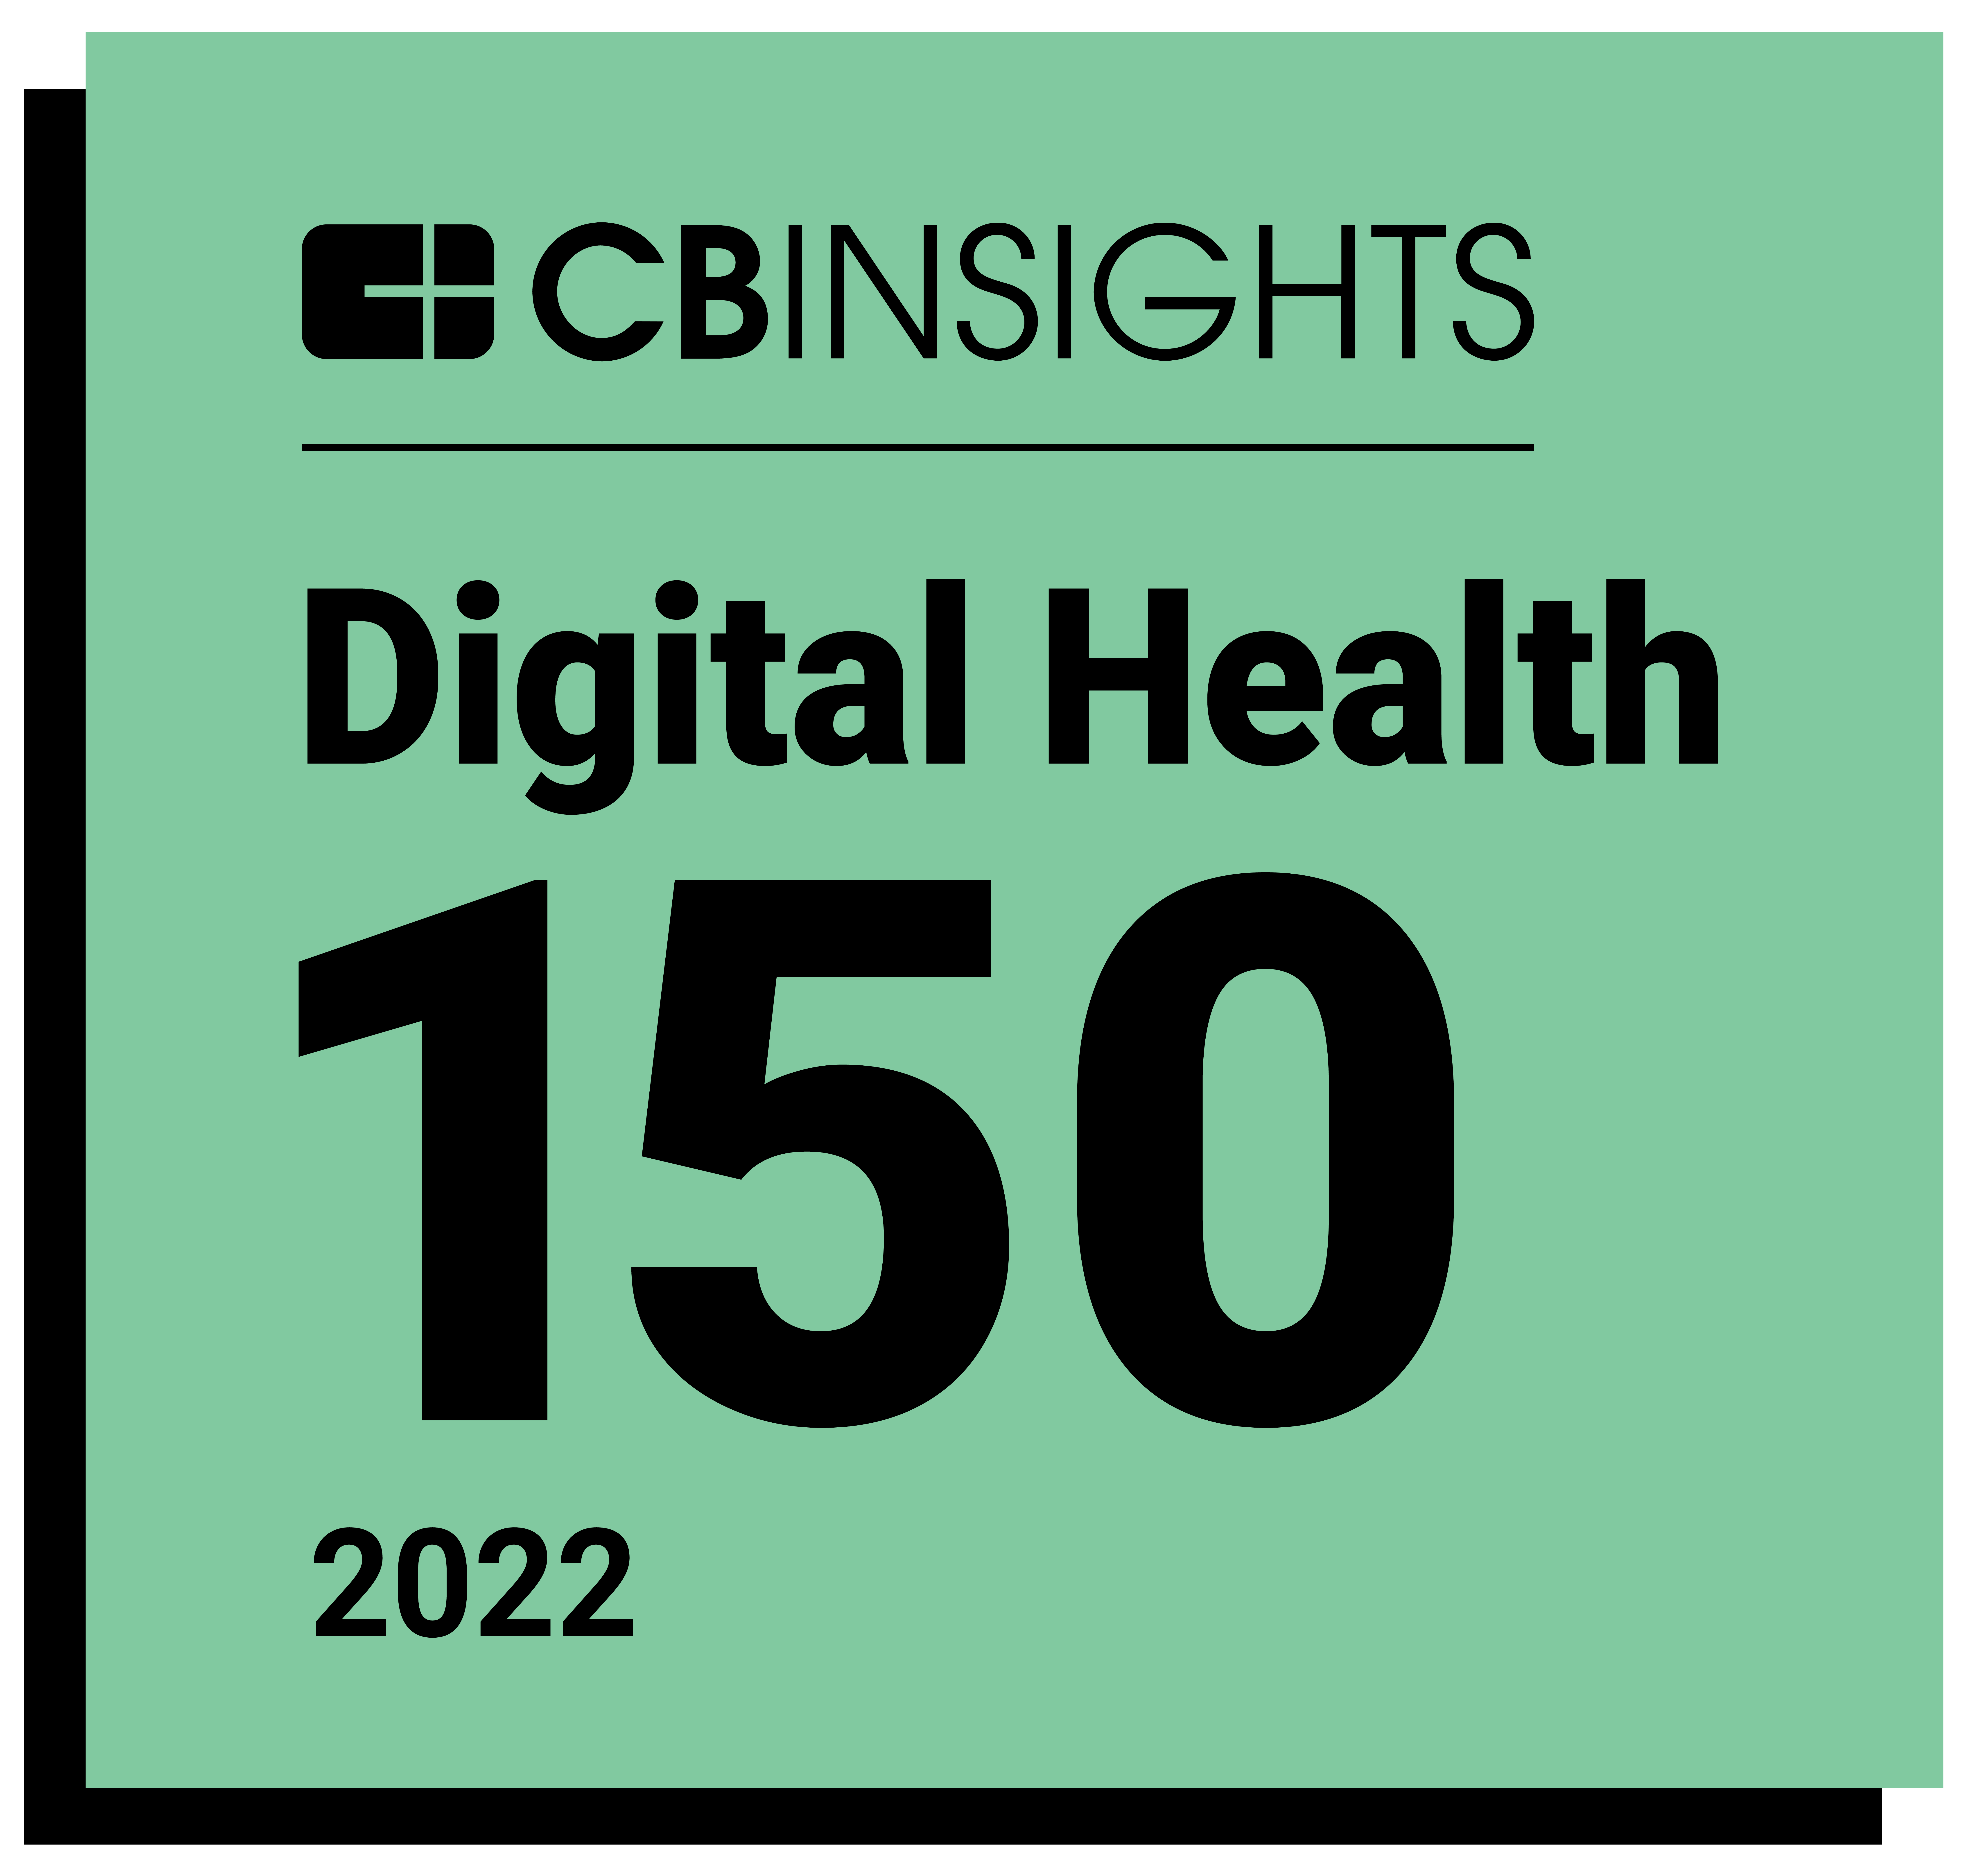 Xealth Named to the 2022 CB Insights’ Digital Health 150 List